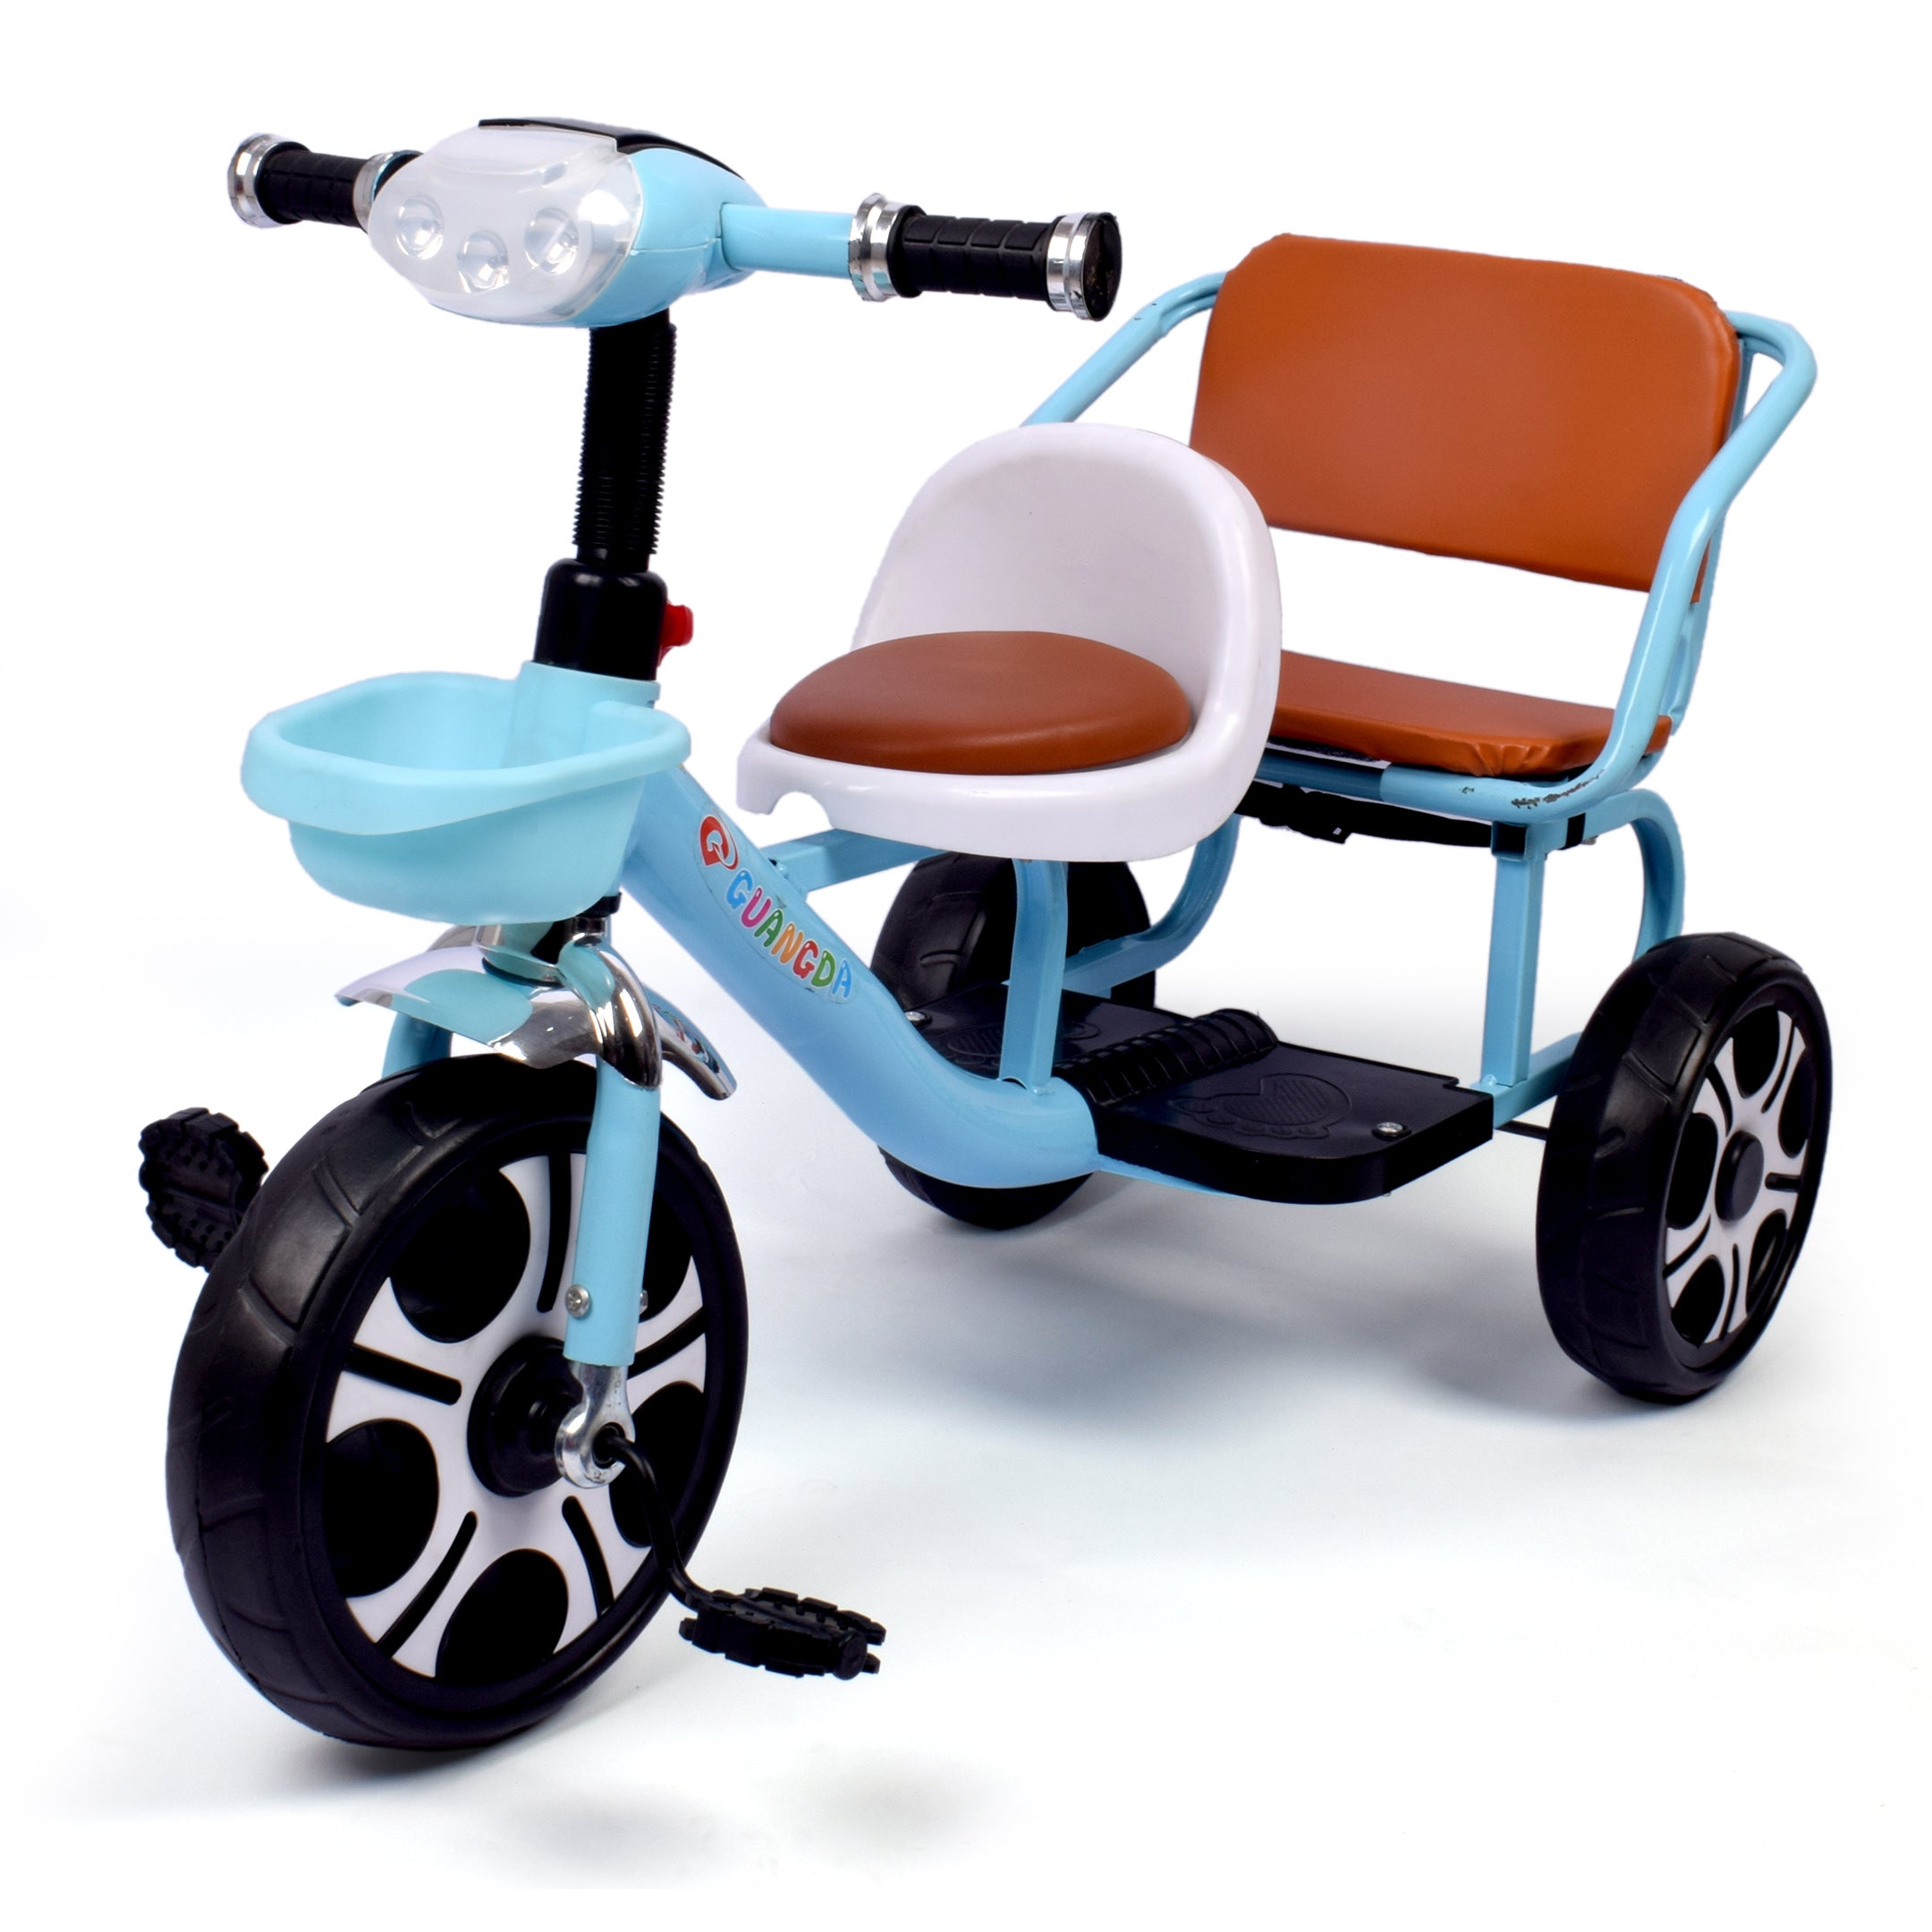 Kids Twin Seater Tricycle - Blue